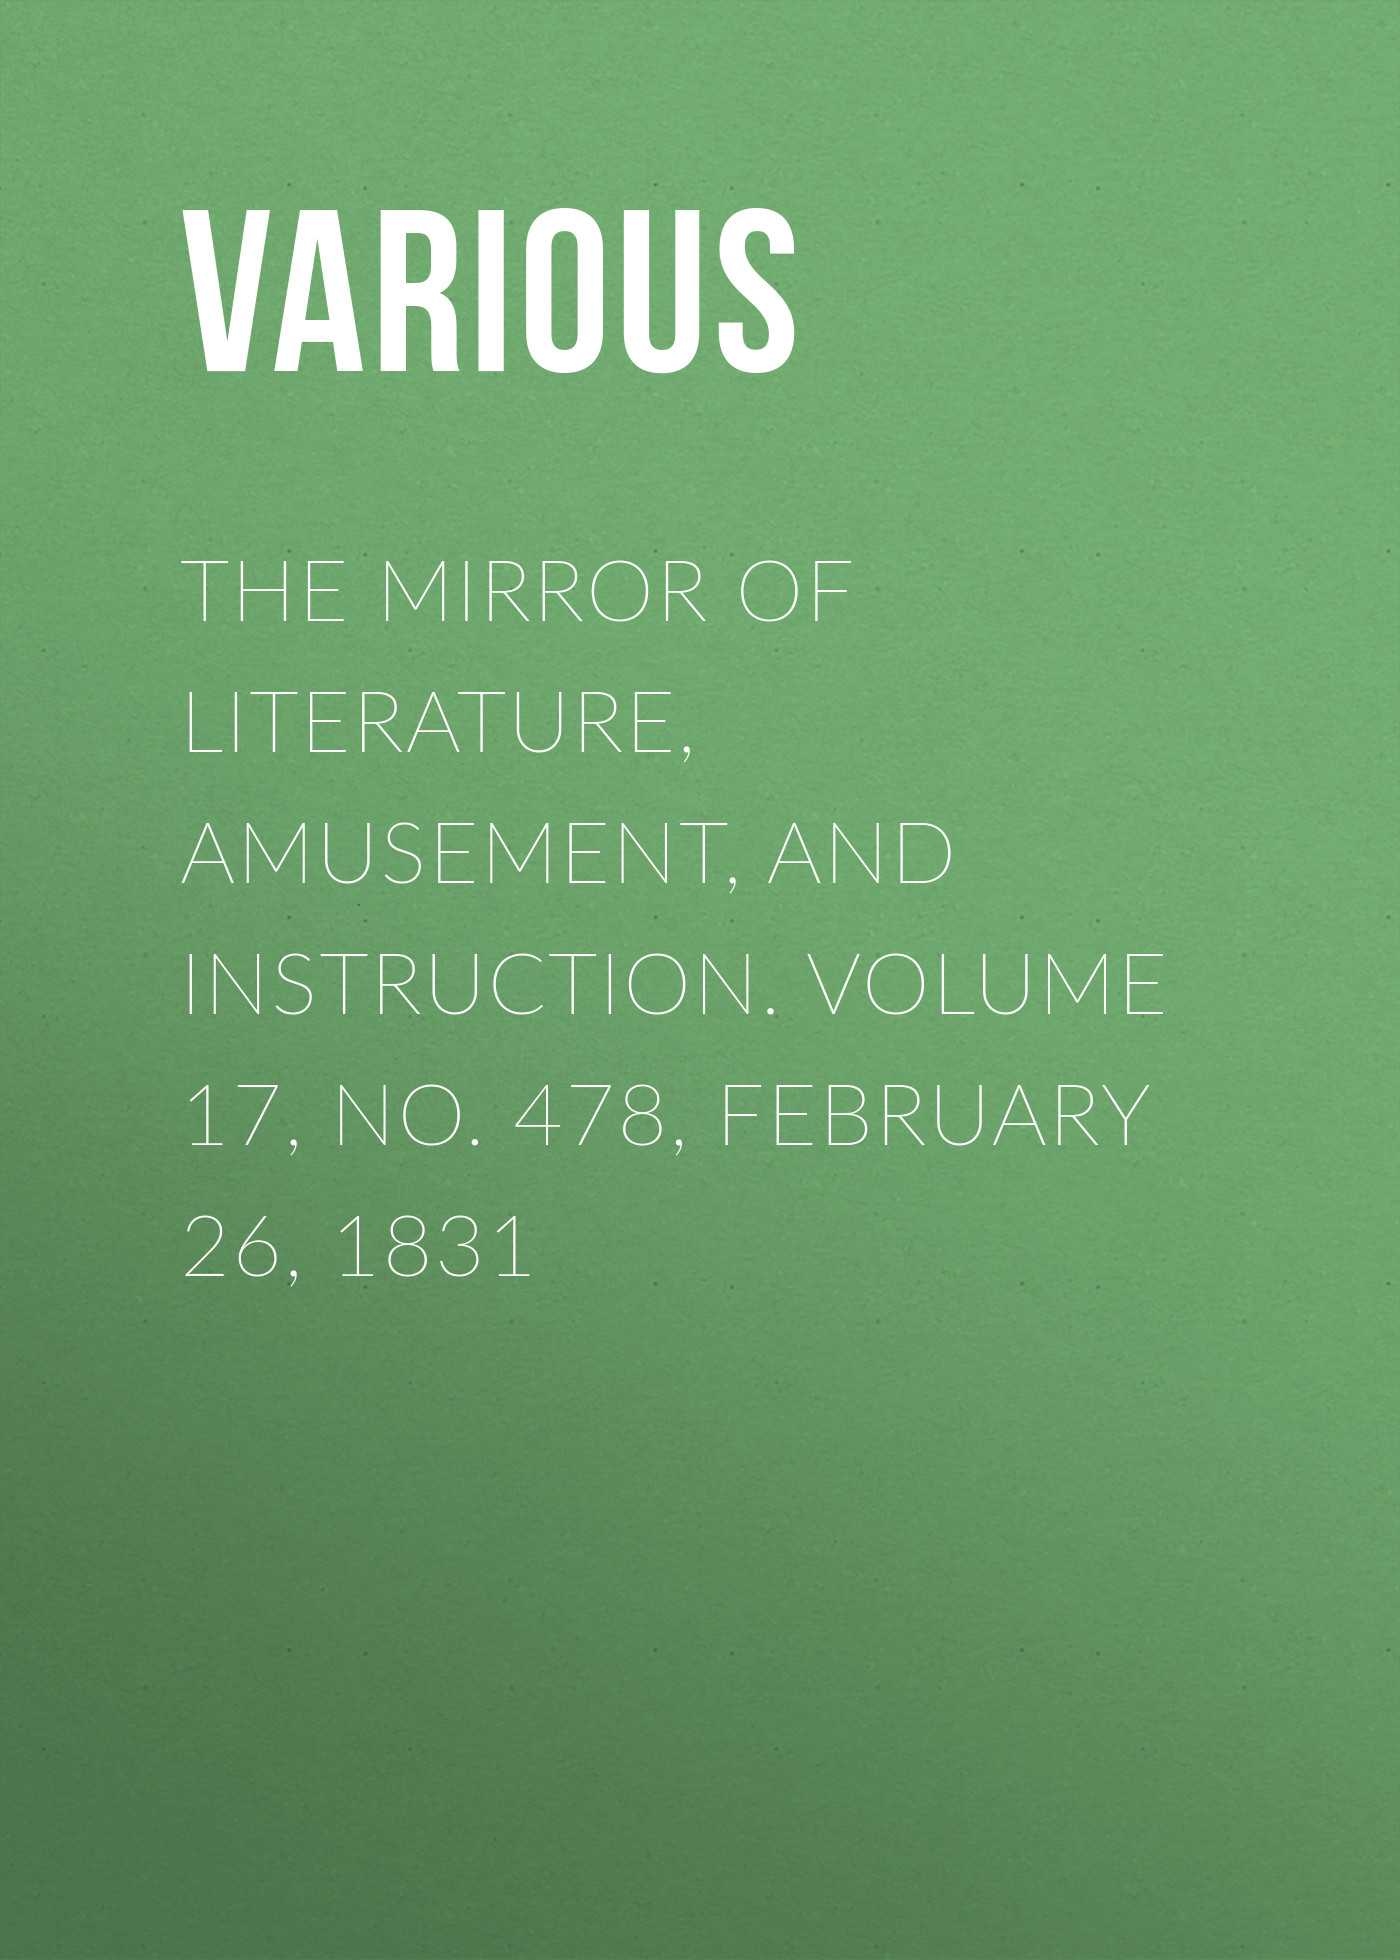 Various The Mirror of Literature, Amusement, and Instruction. Volume 17, No. 478, February 26, 1831